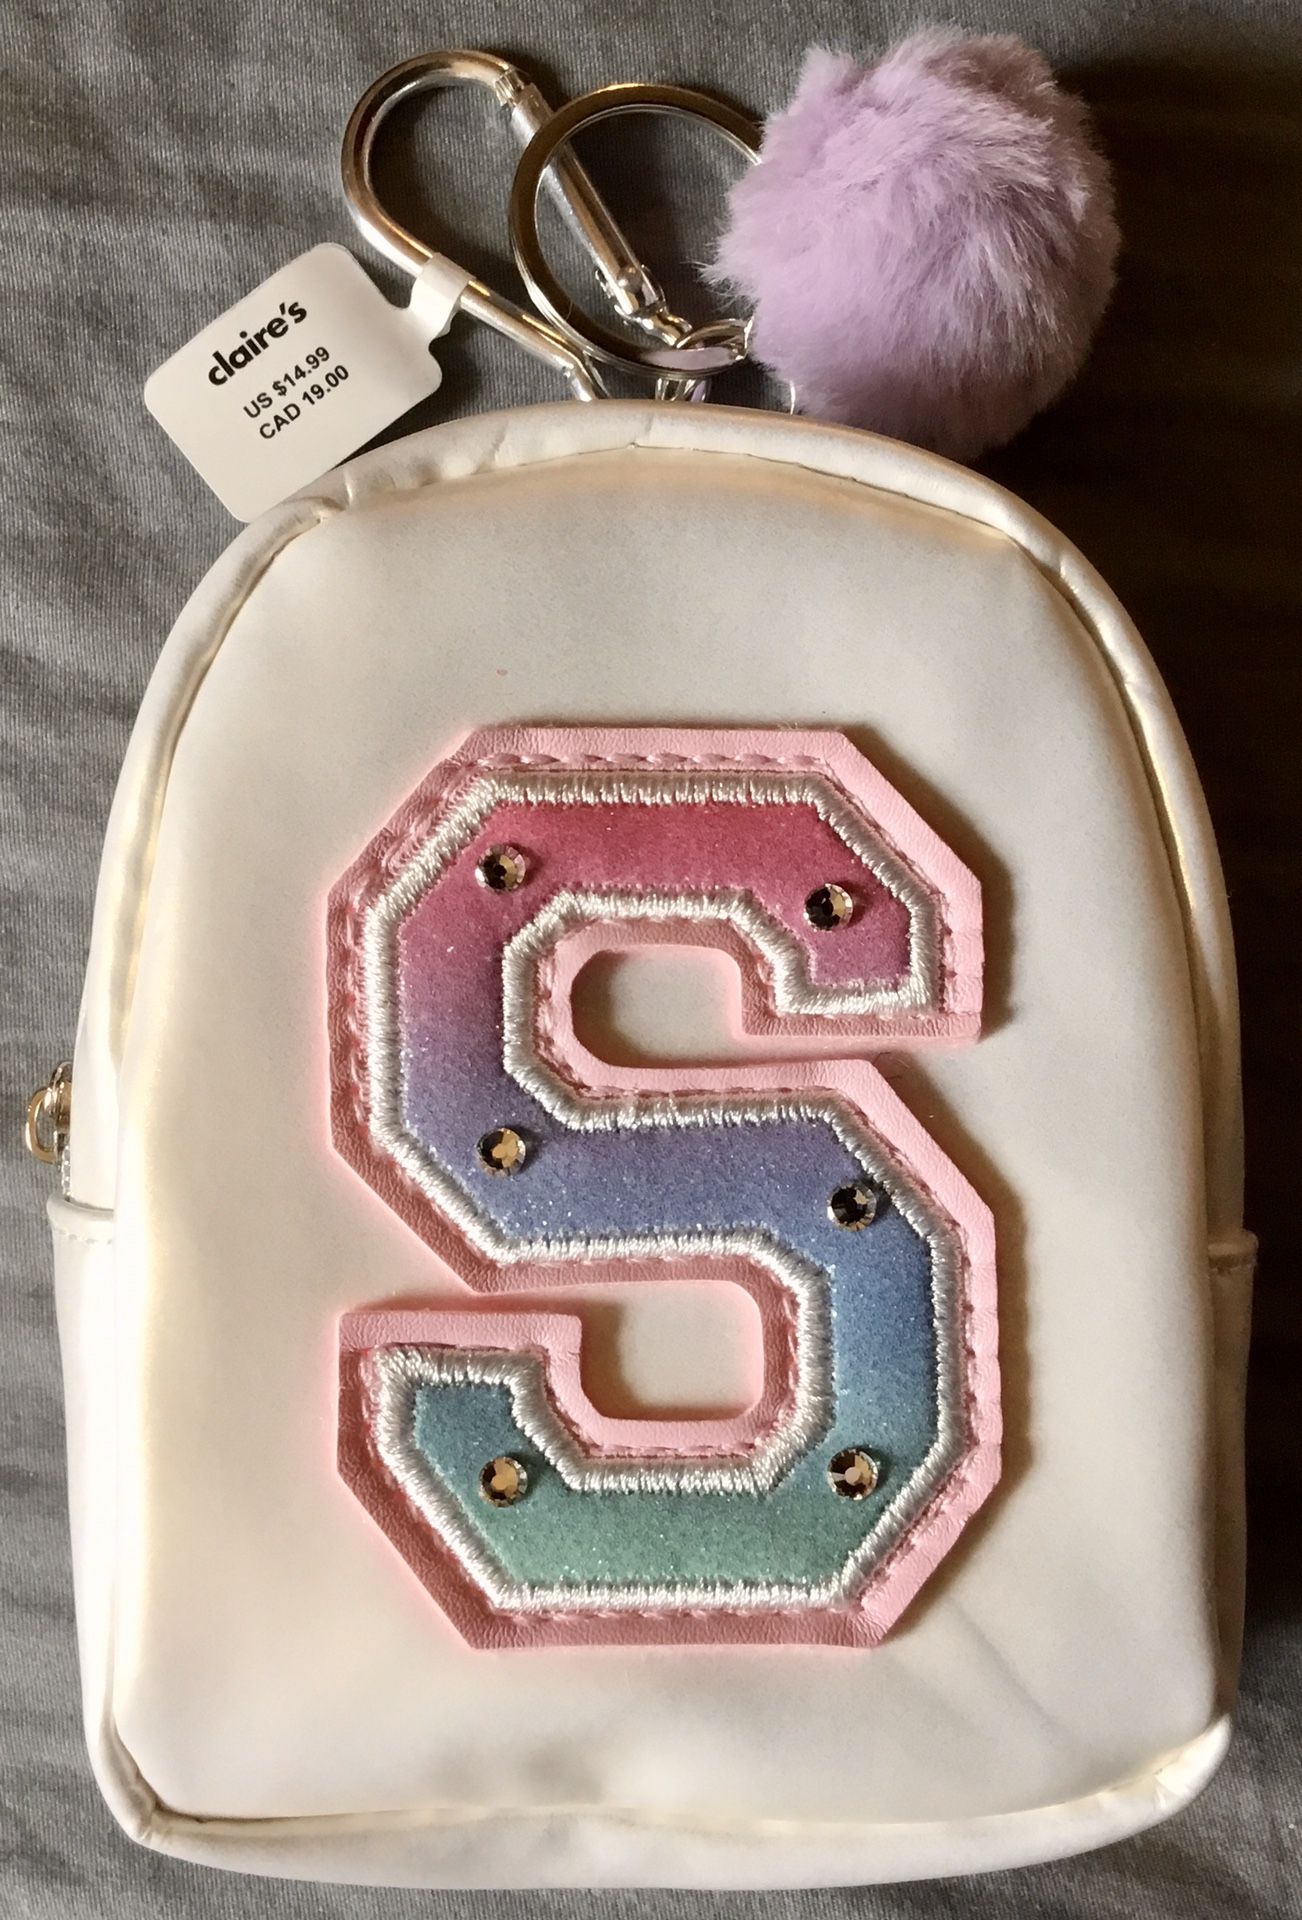 Claire’s Small Initial S Backpack Wallet With Keyring and Carabiner Attachment 4” X 5”